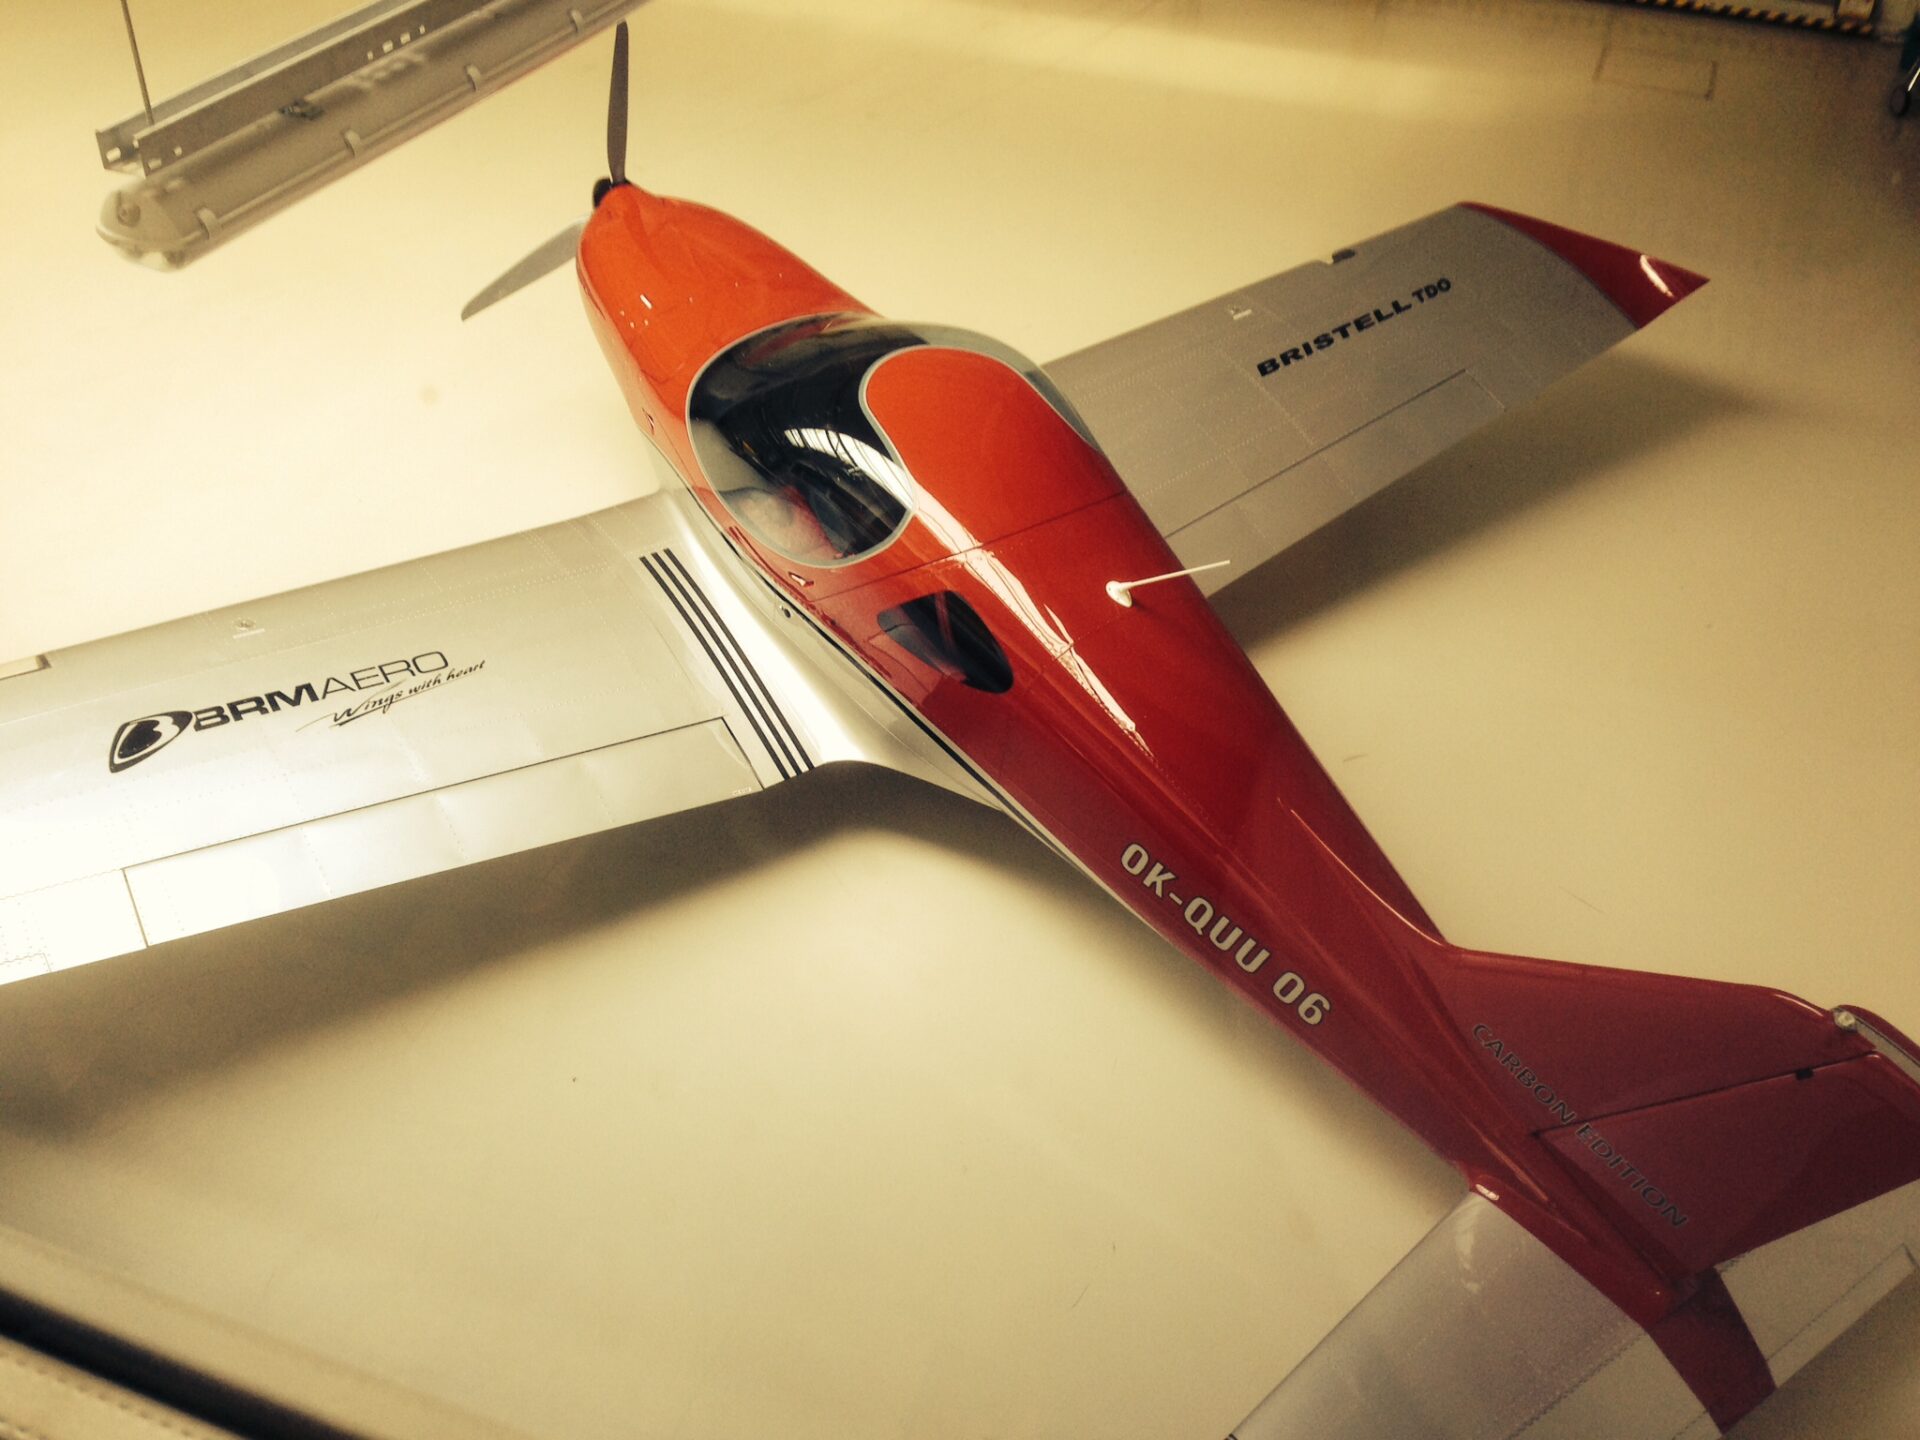 A red and silver airplane is on the table